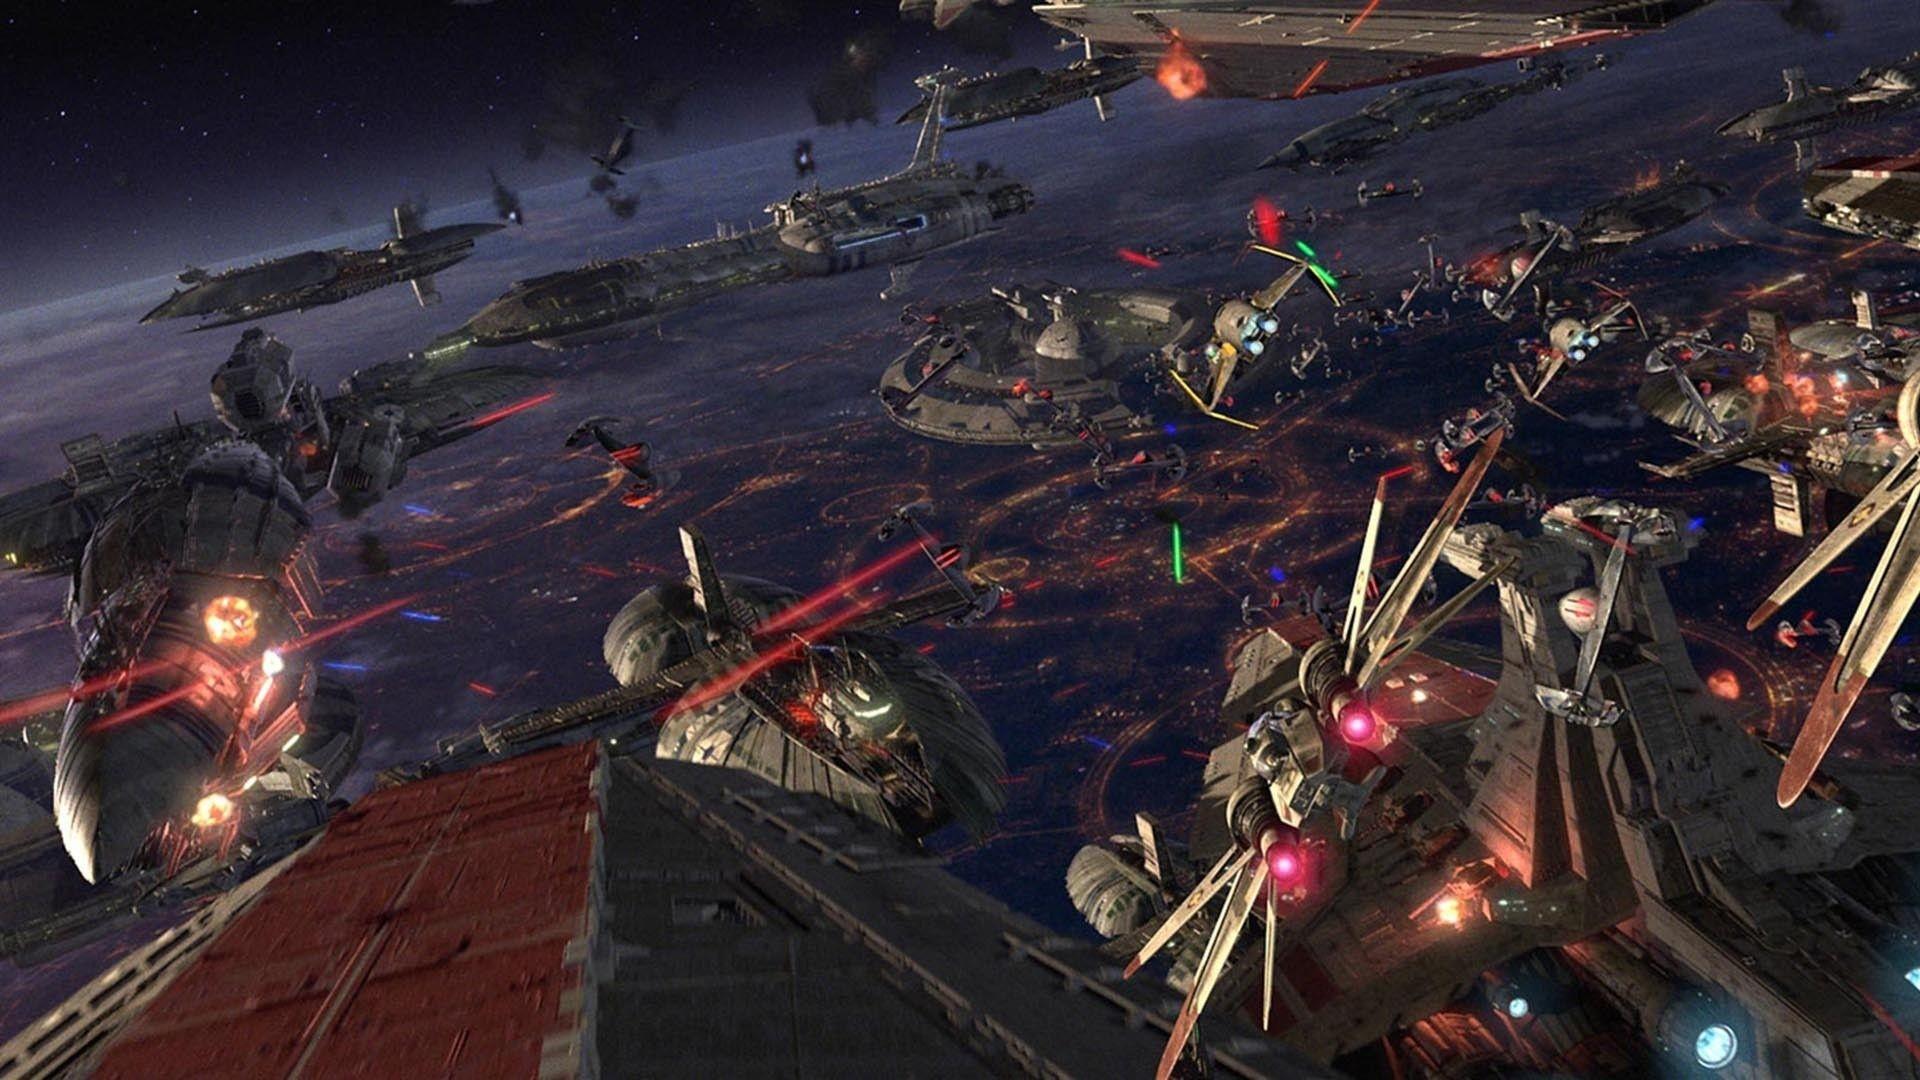 Star Wars Space Battle Wallpapers Top Free Star Wars Space Battle Backgrounds Wallpaperaccess